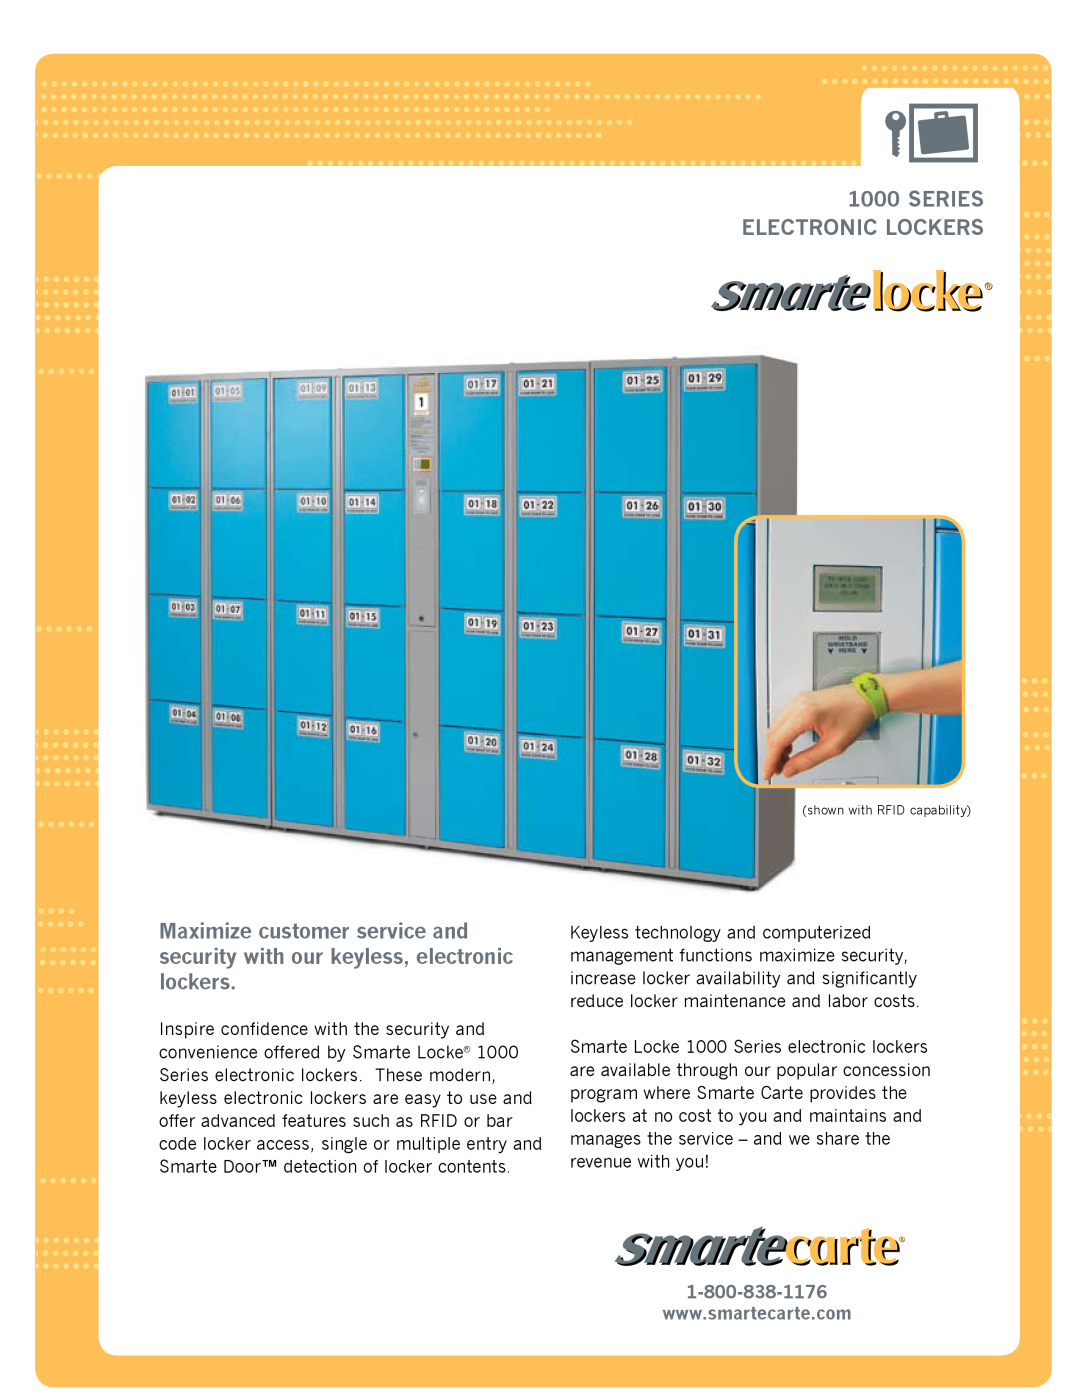 Smartek 1000 manual Series Electronic Lockers, shown with RFID capability 